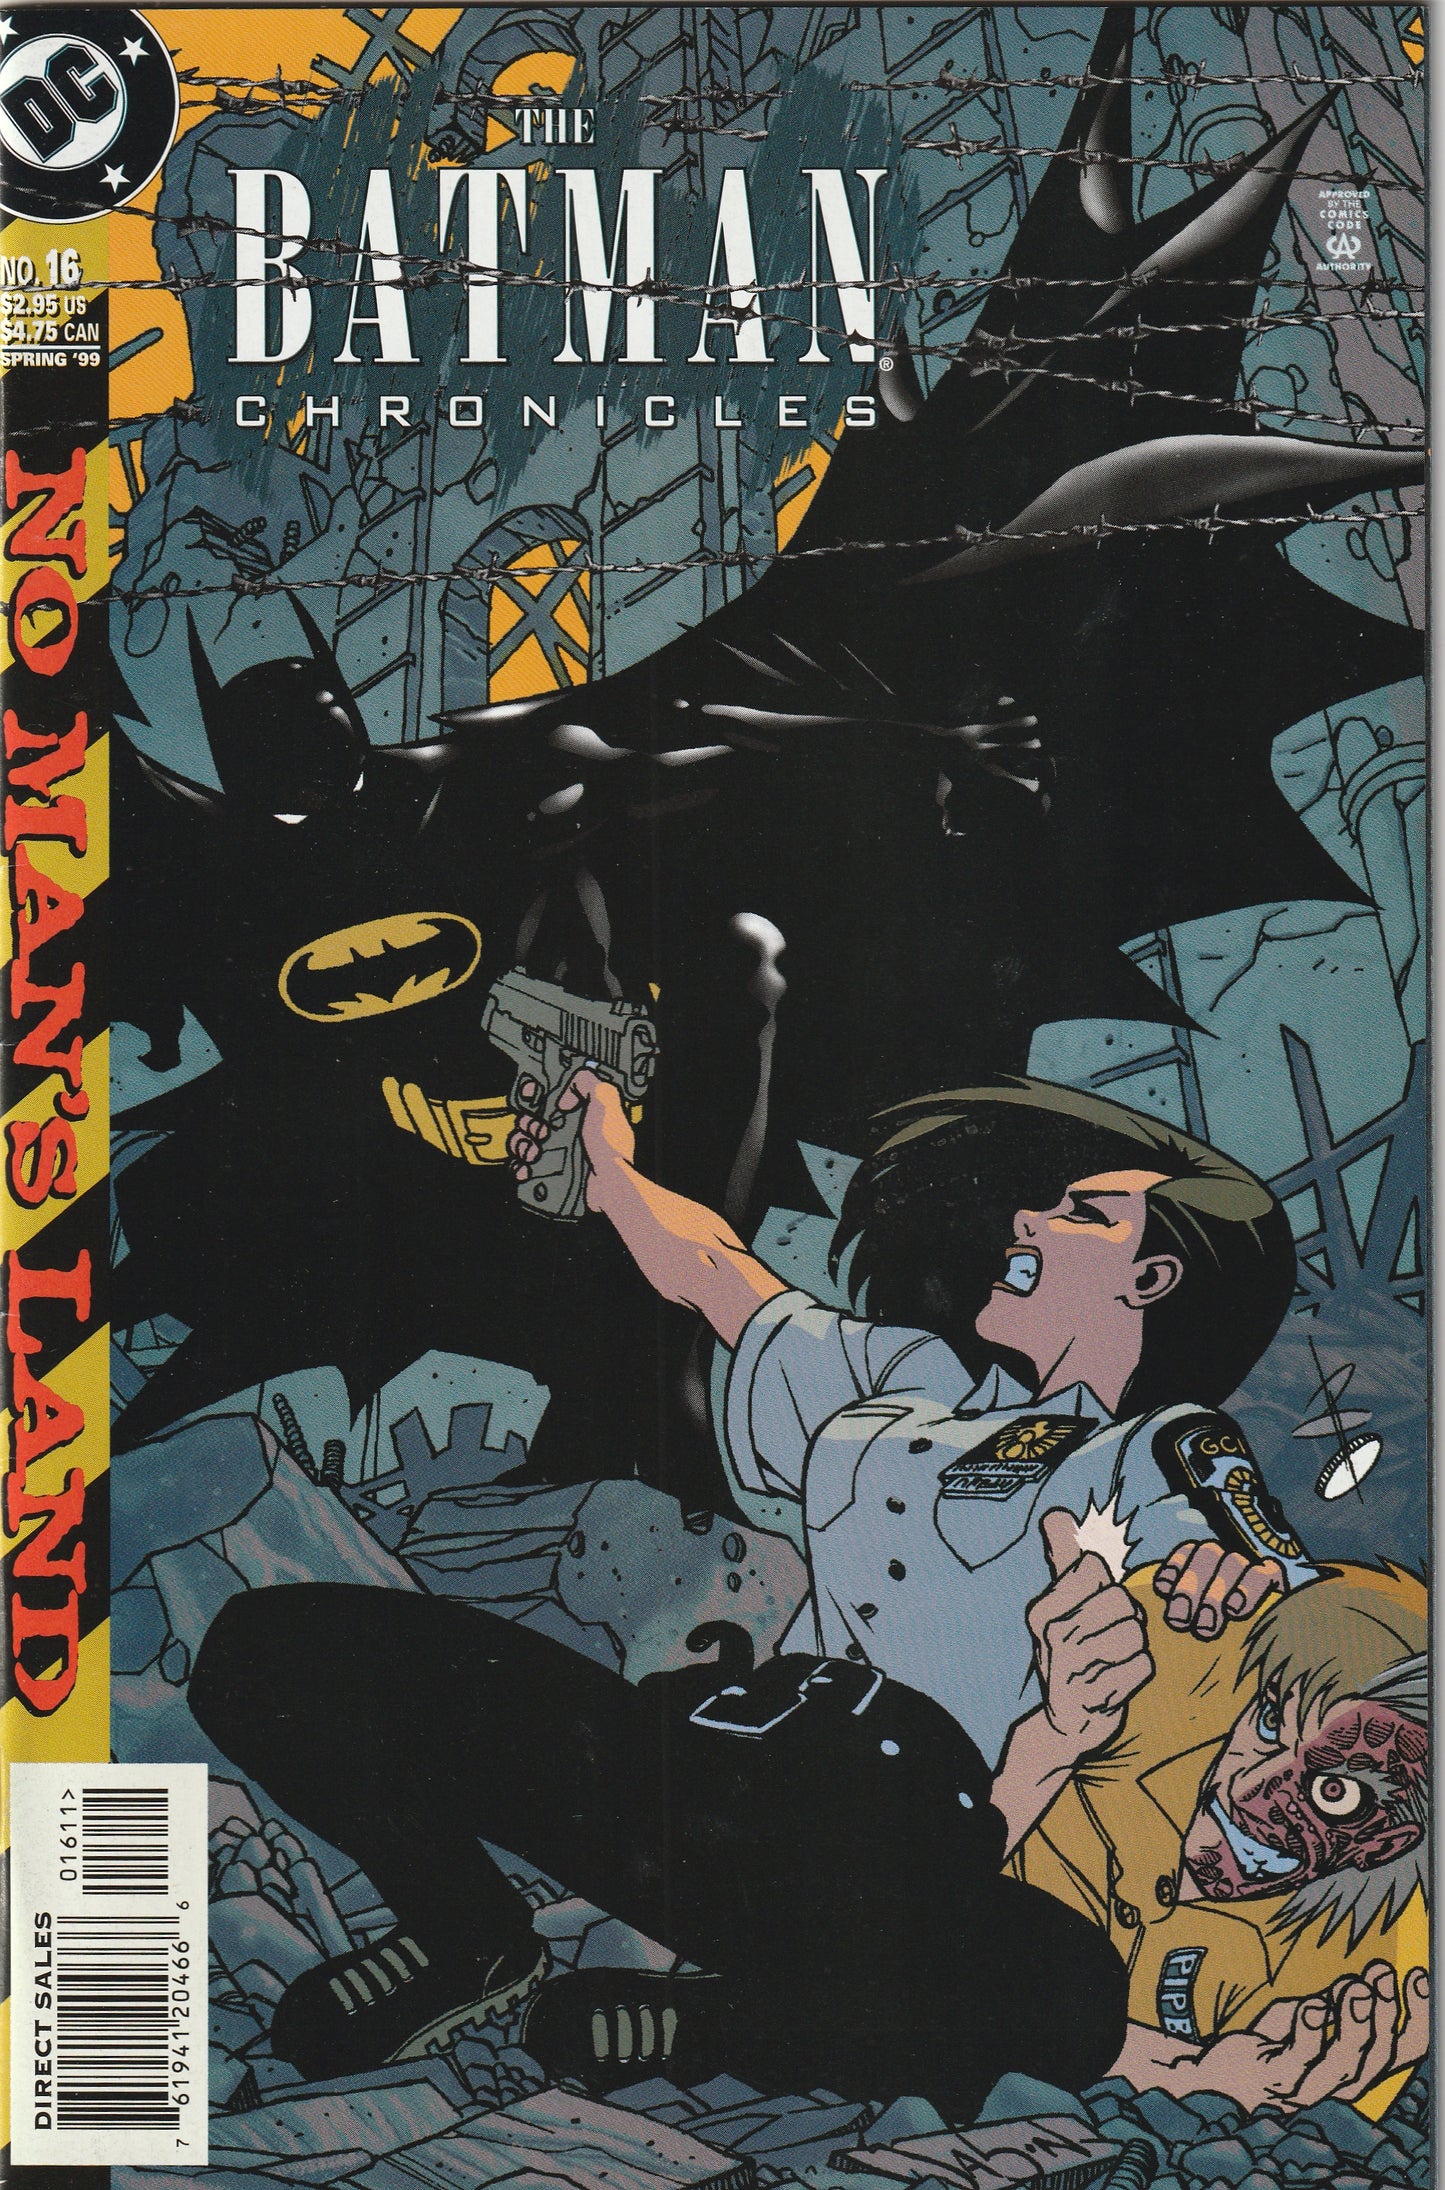 The Batman Chronicles #16 (1999) - No Man's Land tie-in